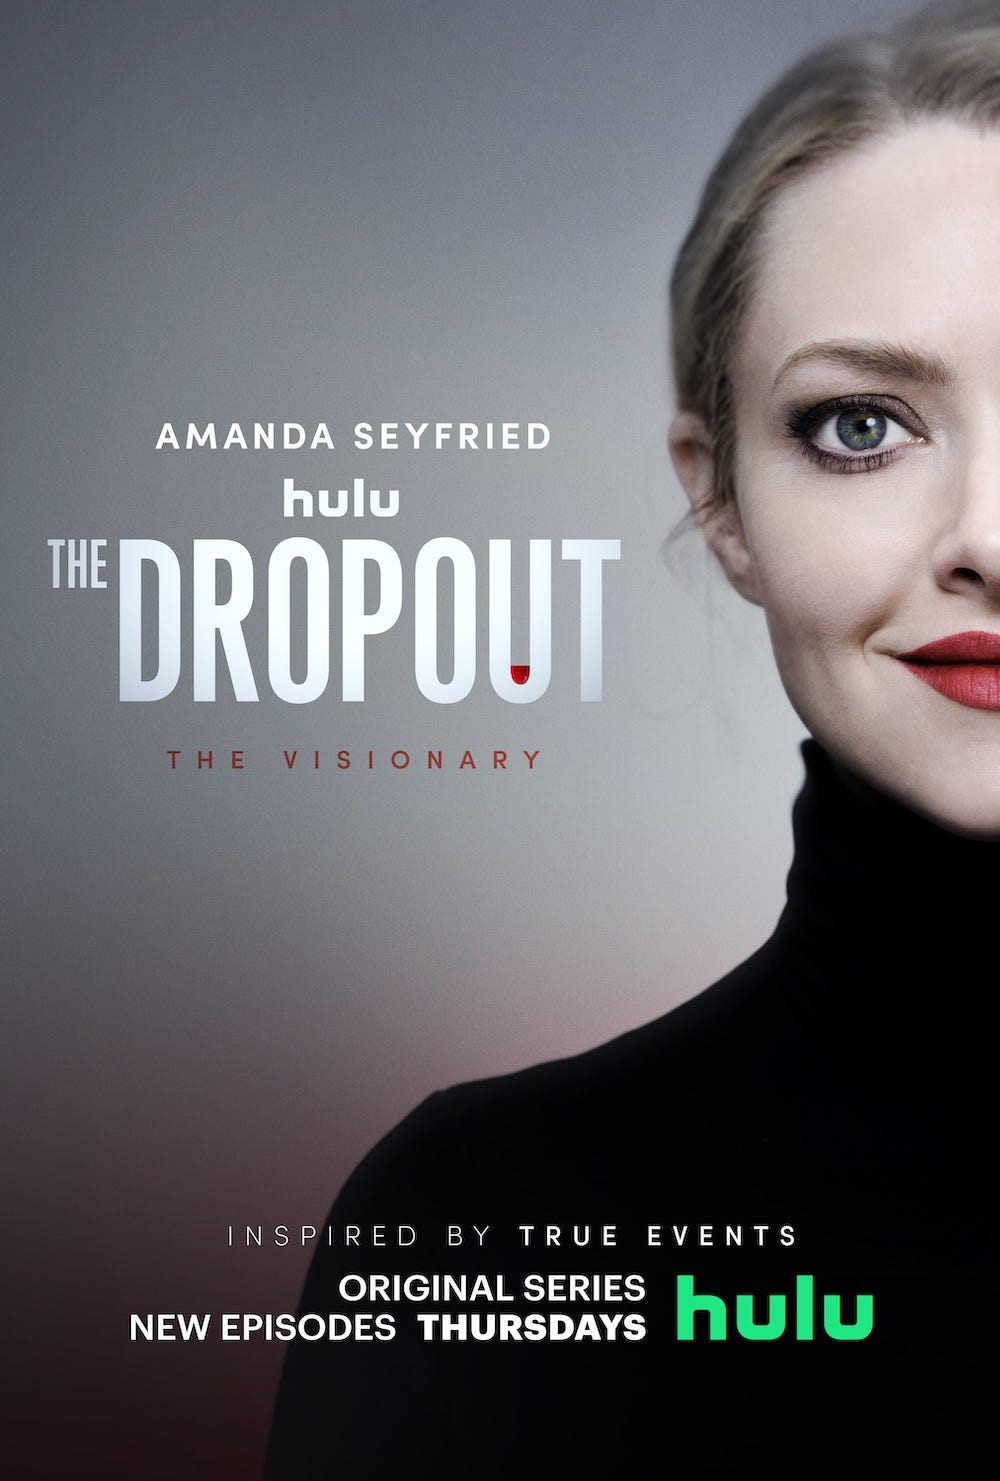 The Dropout : TV Review. Billionaire worship is not new. The… | by Michael  Miranda | UmpireFeatures | Medium